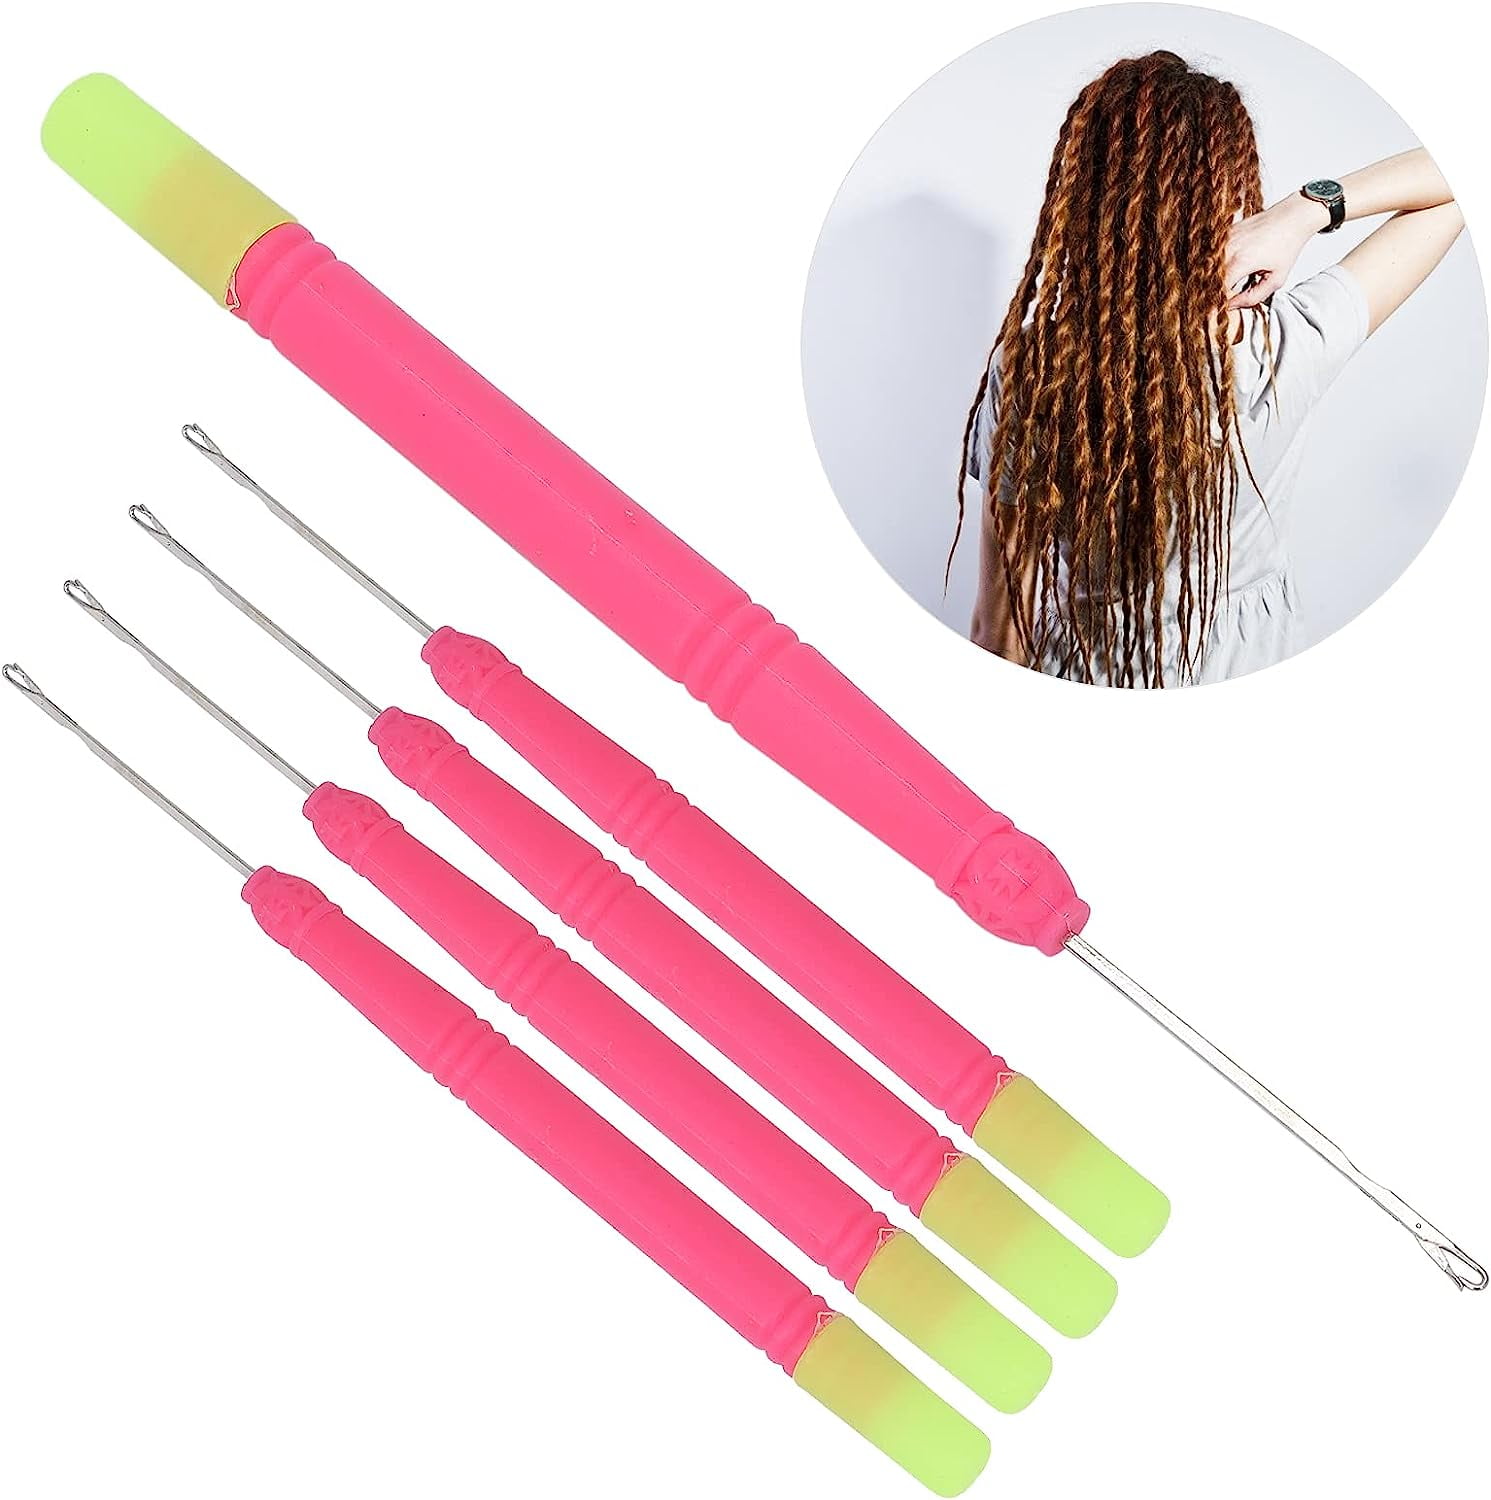 3kinds Leather Craft Crochet Needle Latch Hook Weave Hair Extension Tool Set